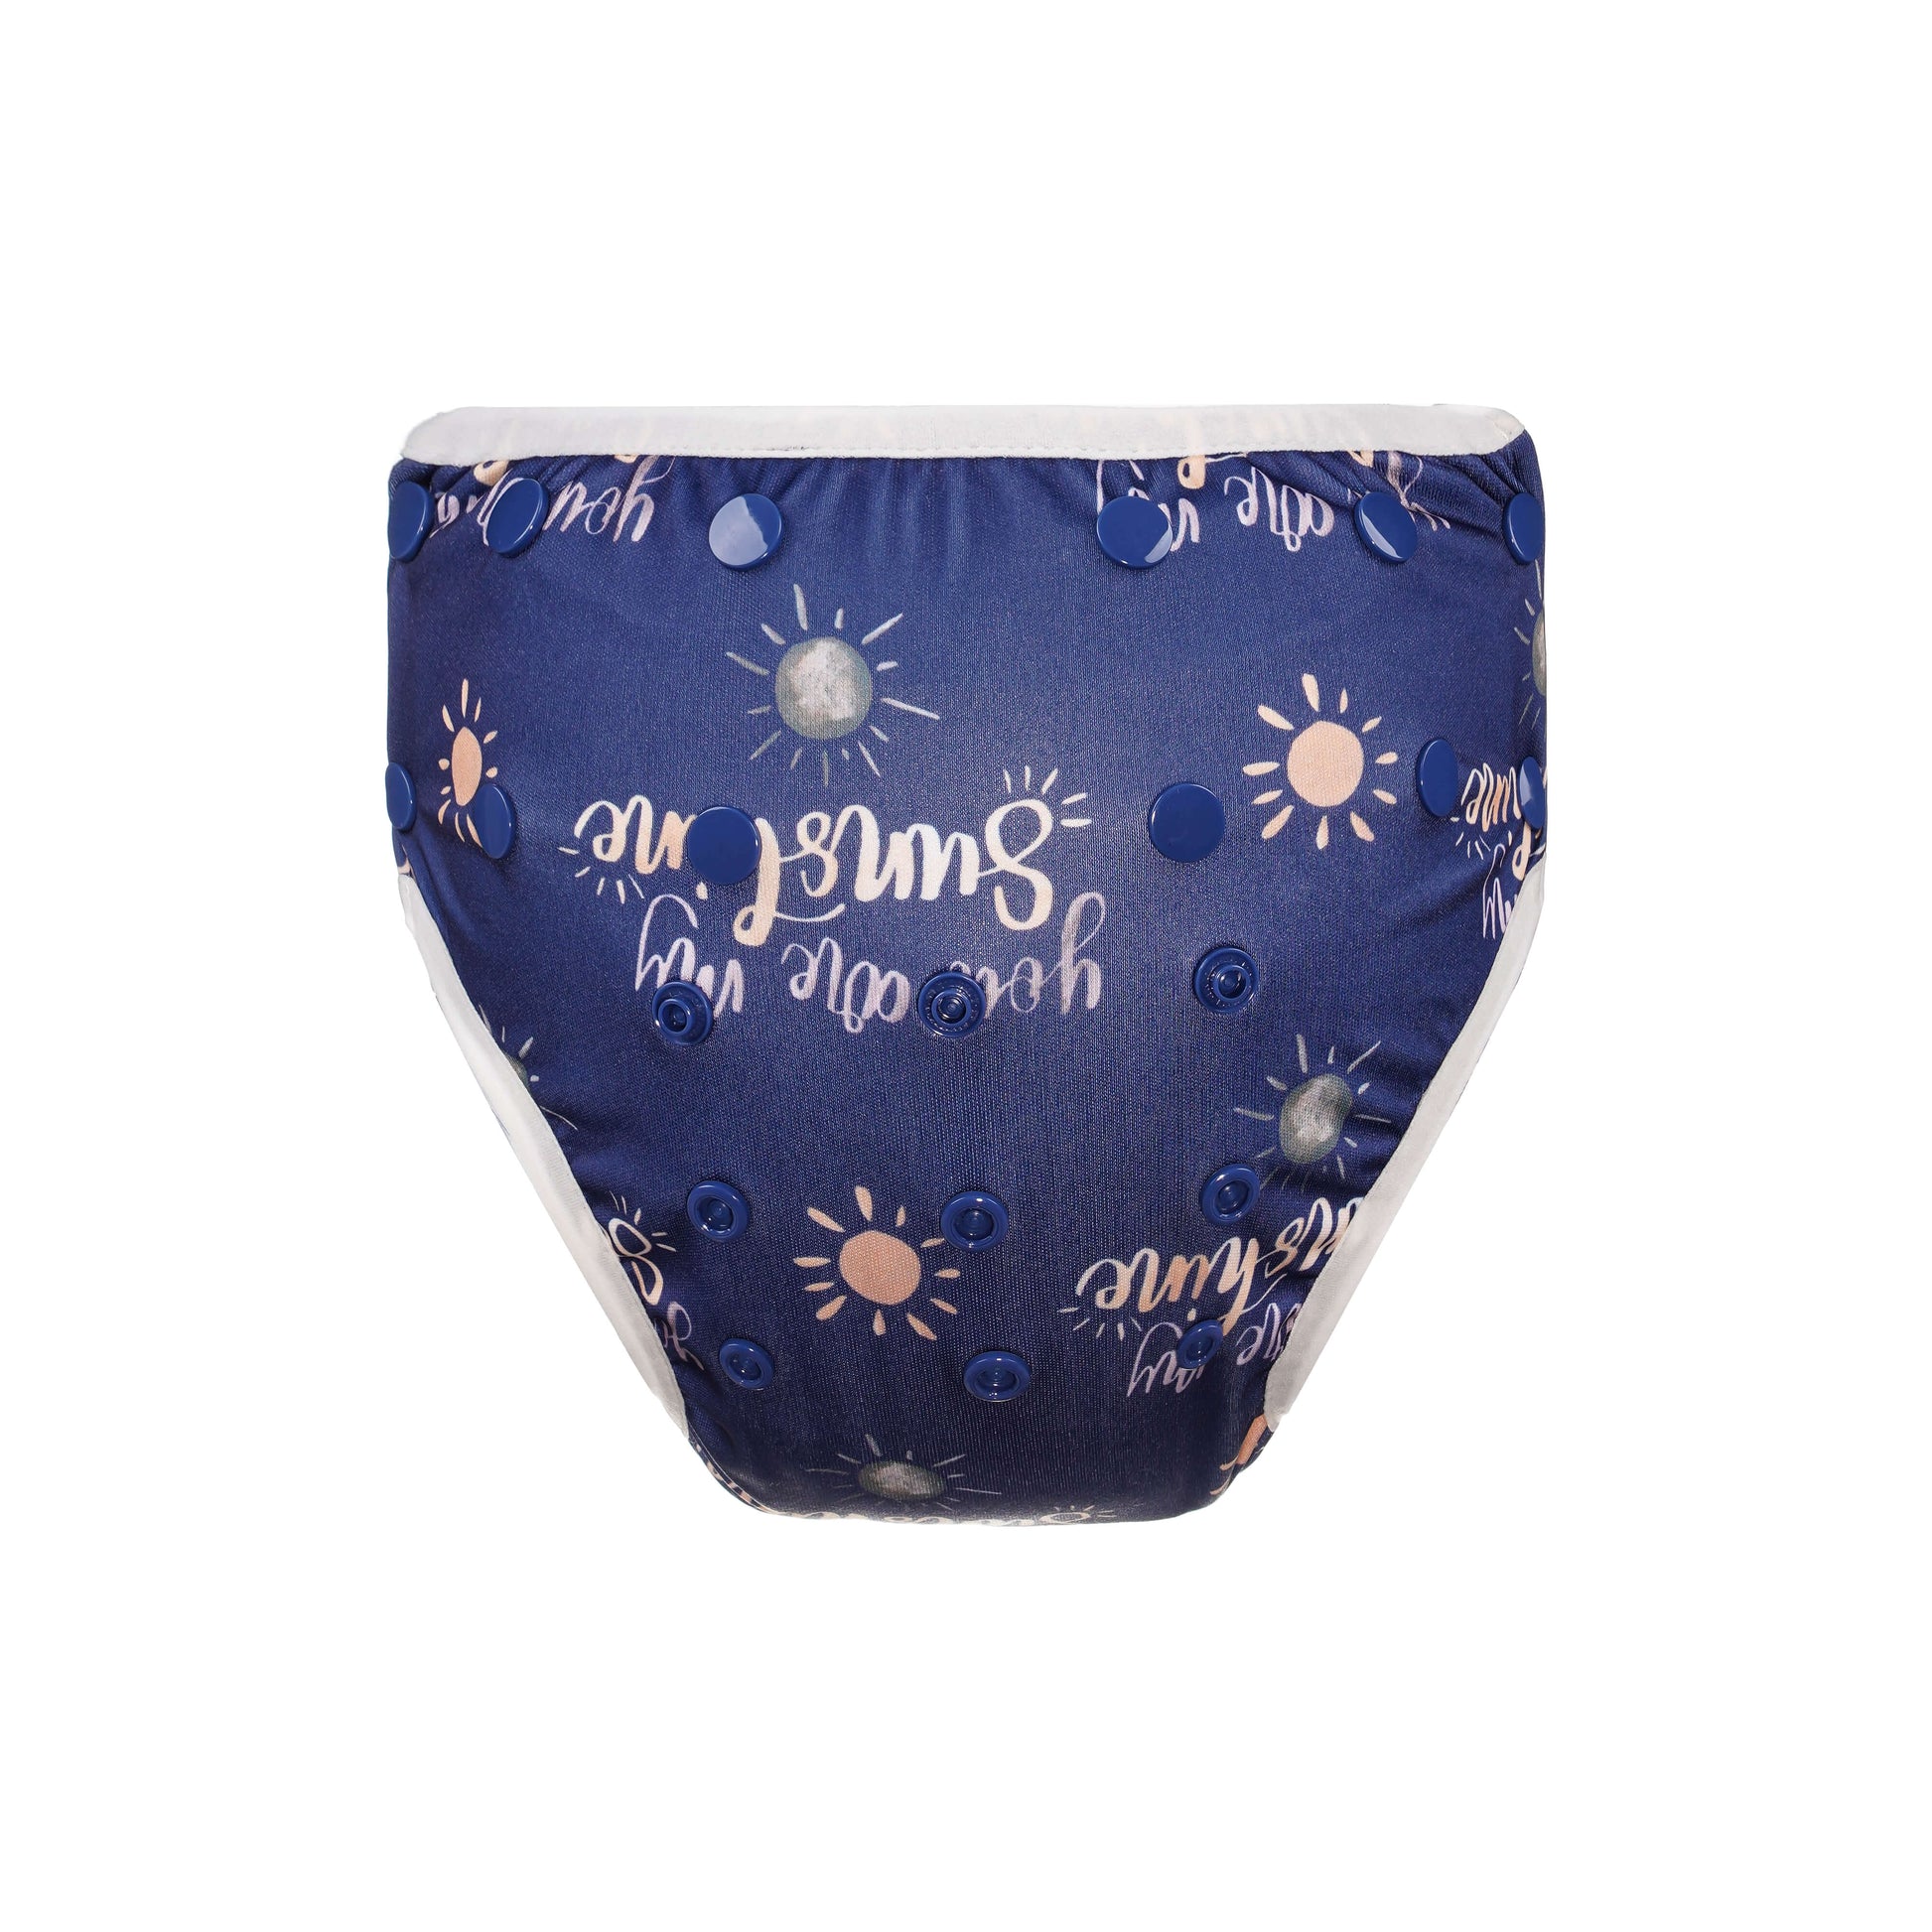 Bear & Moo Reusable Swim Nappy in You are my Sunshine